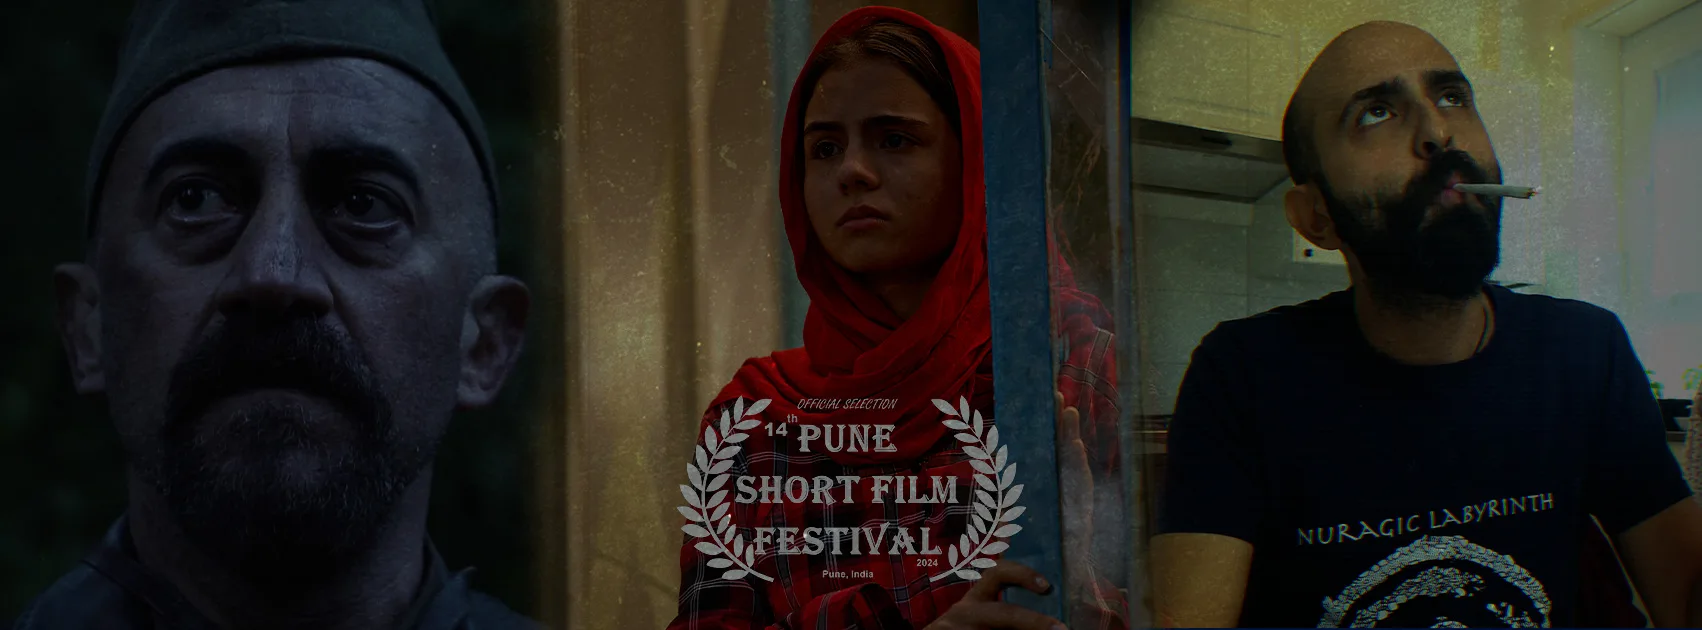 Three Alpha's short films in competition at Pune Short Film Festival.